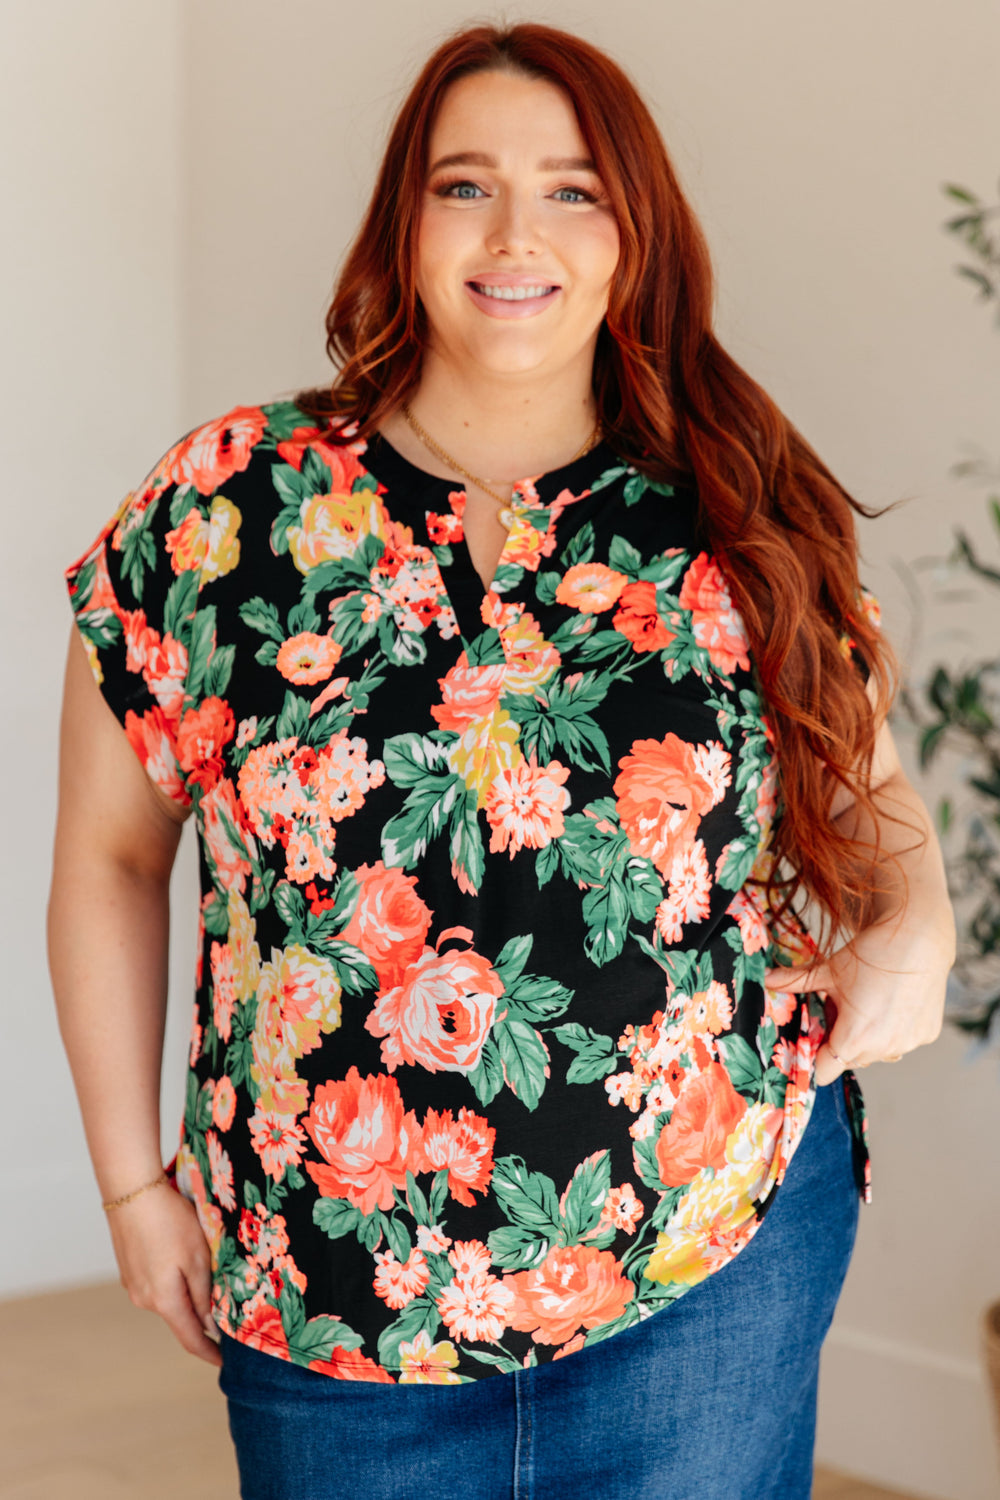 Lizzy Cap Sleeve Top in Black Garden Floral-Short Sleeve Tops-Inspired by Justeen-Women's Clothing Boutique in Chicago, Illinois